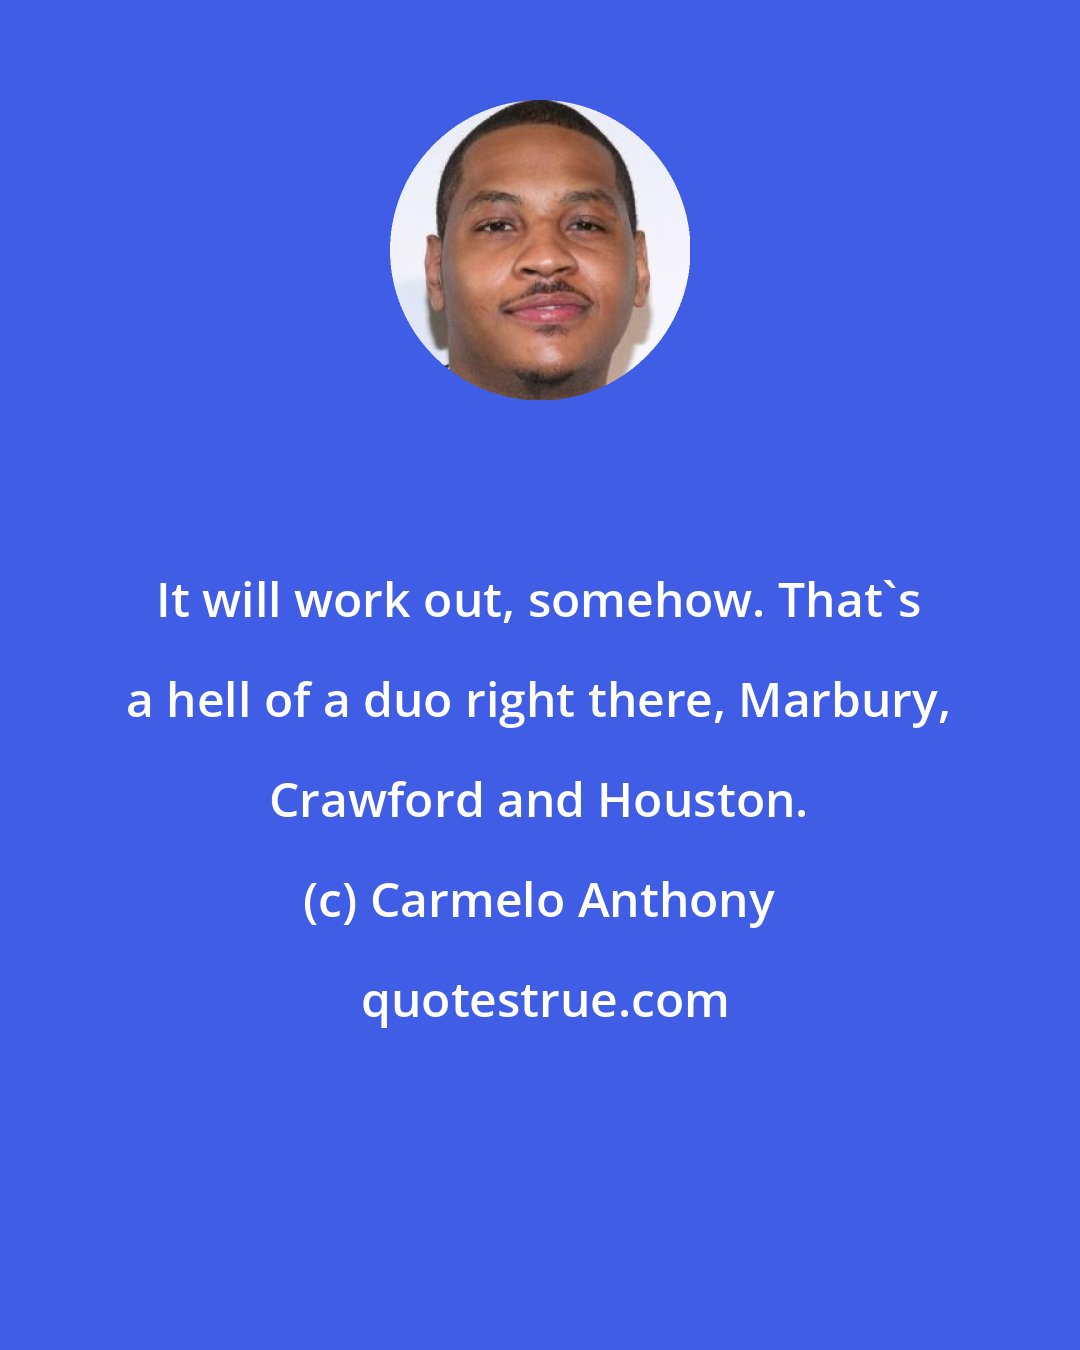 Carmelo Anthony: It will work out, somehow. That's a hell of a duo right there, Marbury, Crawford and Houston.